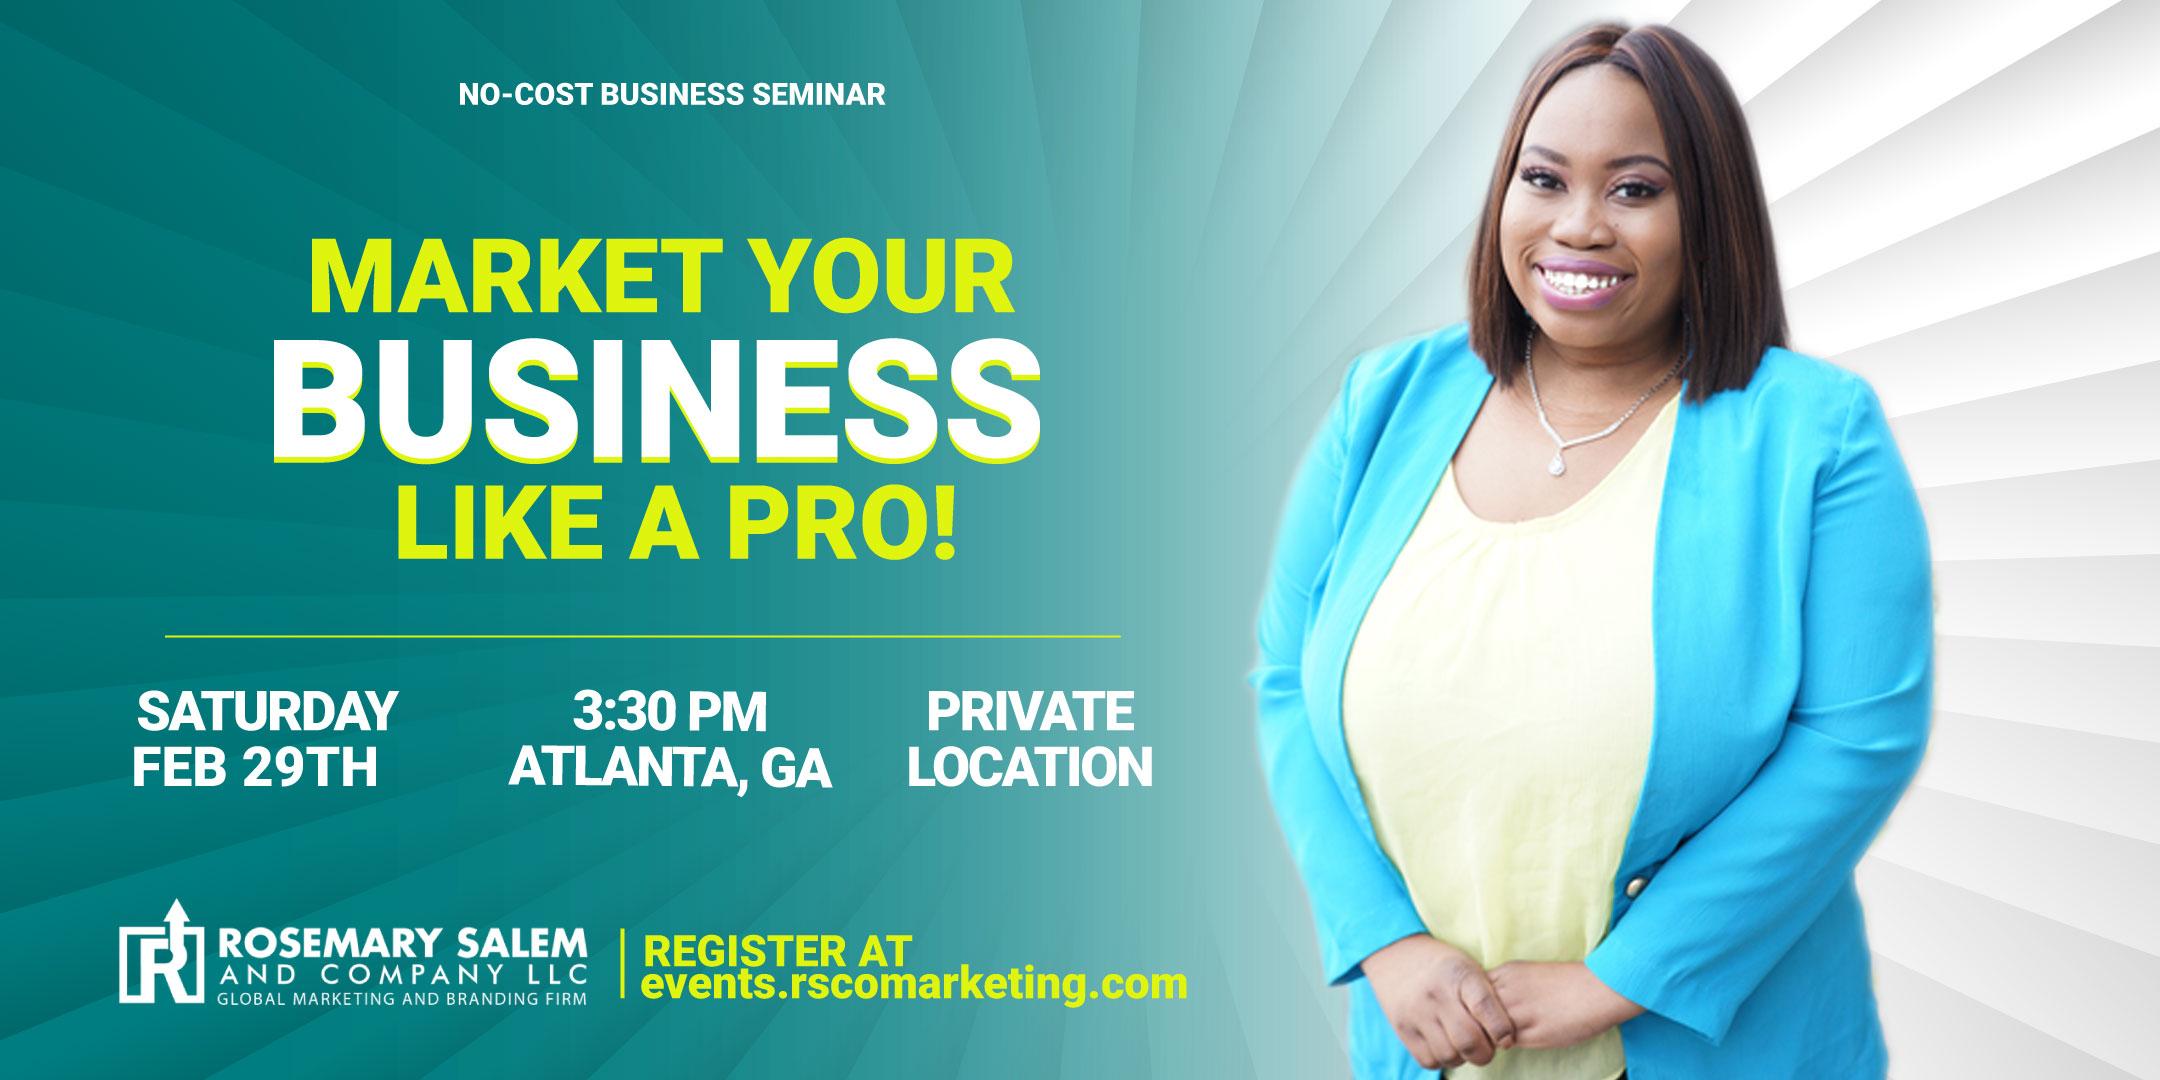 Market Your Business a Like Pro!